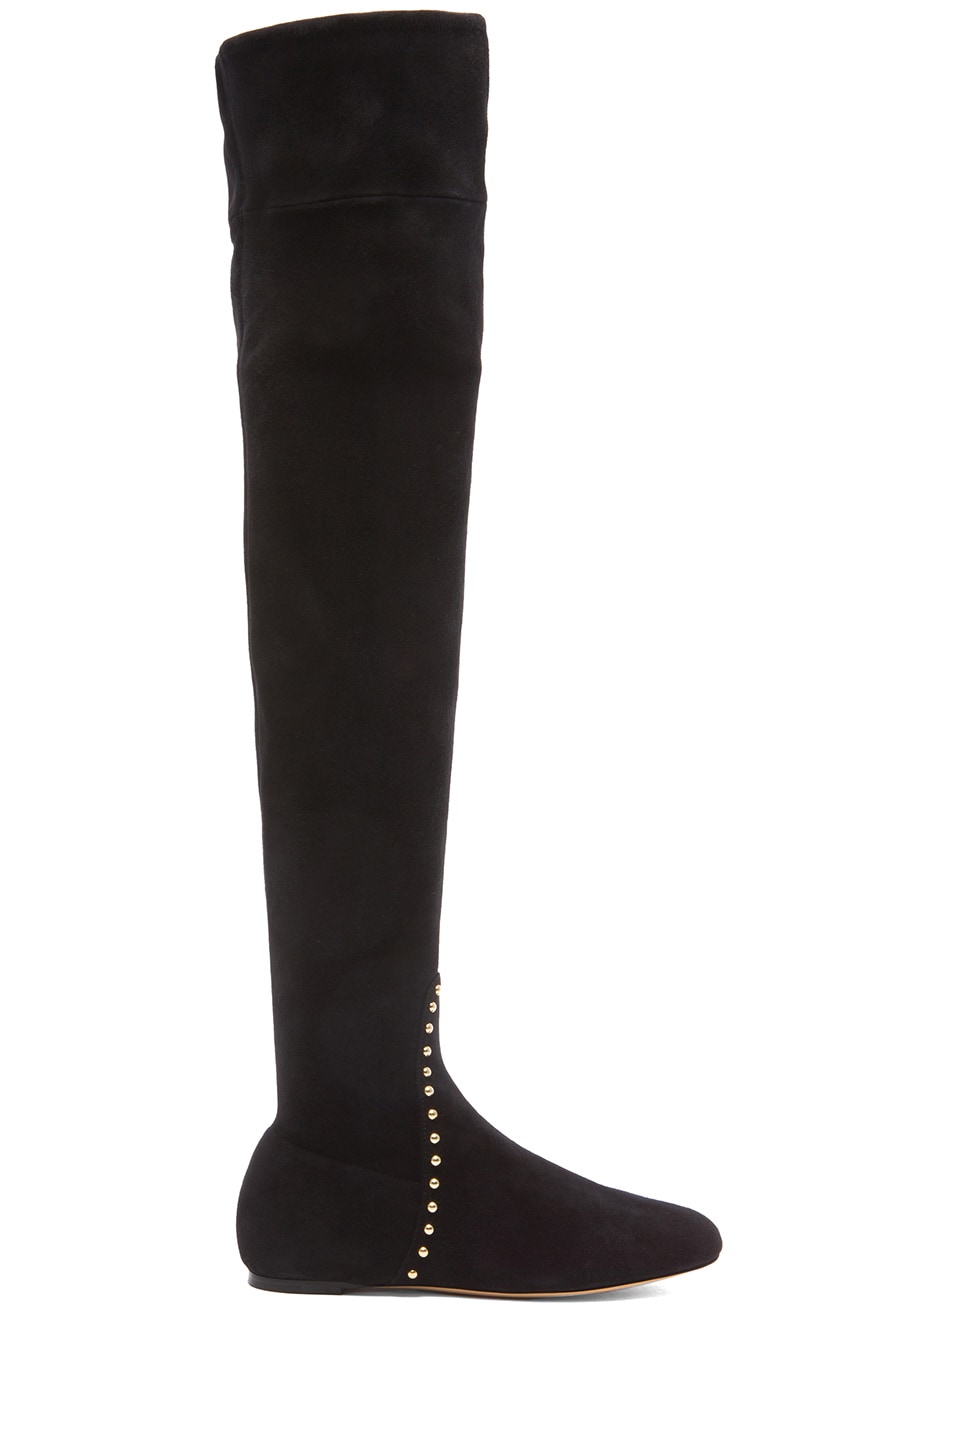 Image 1 of Charlotte Olympia Andie Suede Boots in Onyx